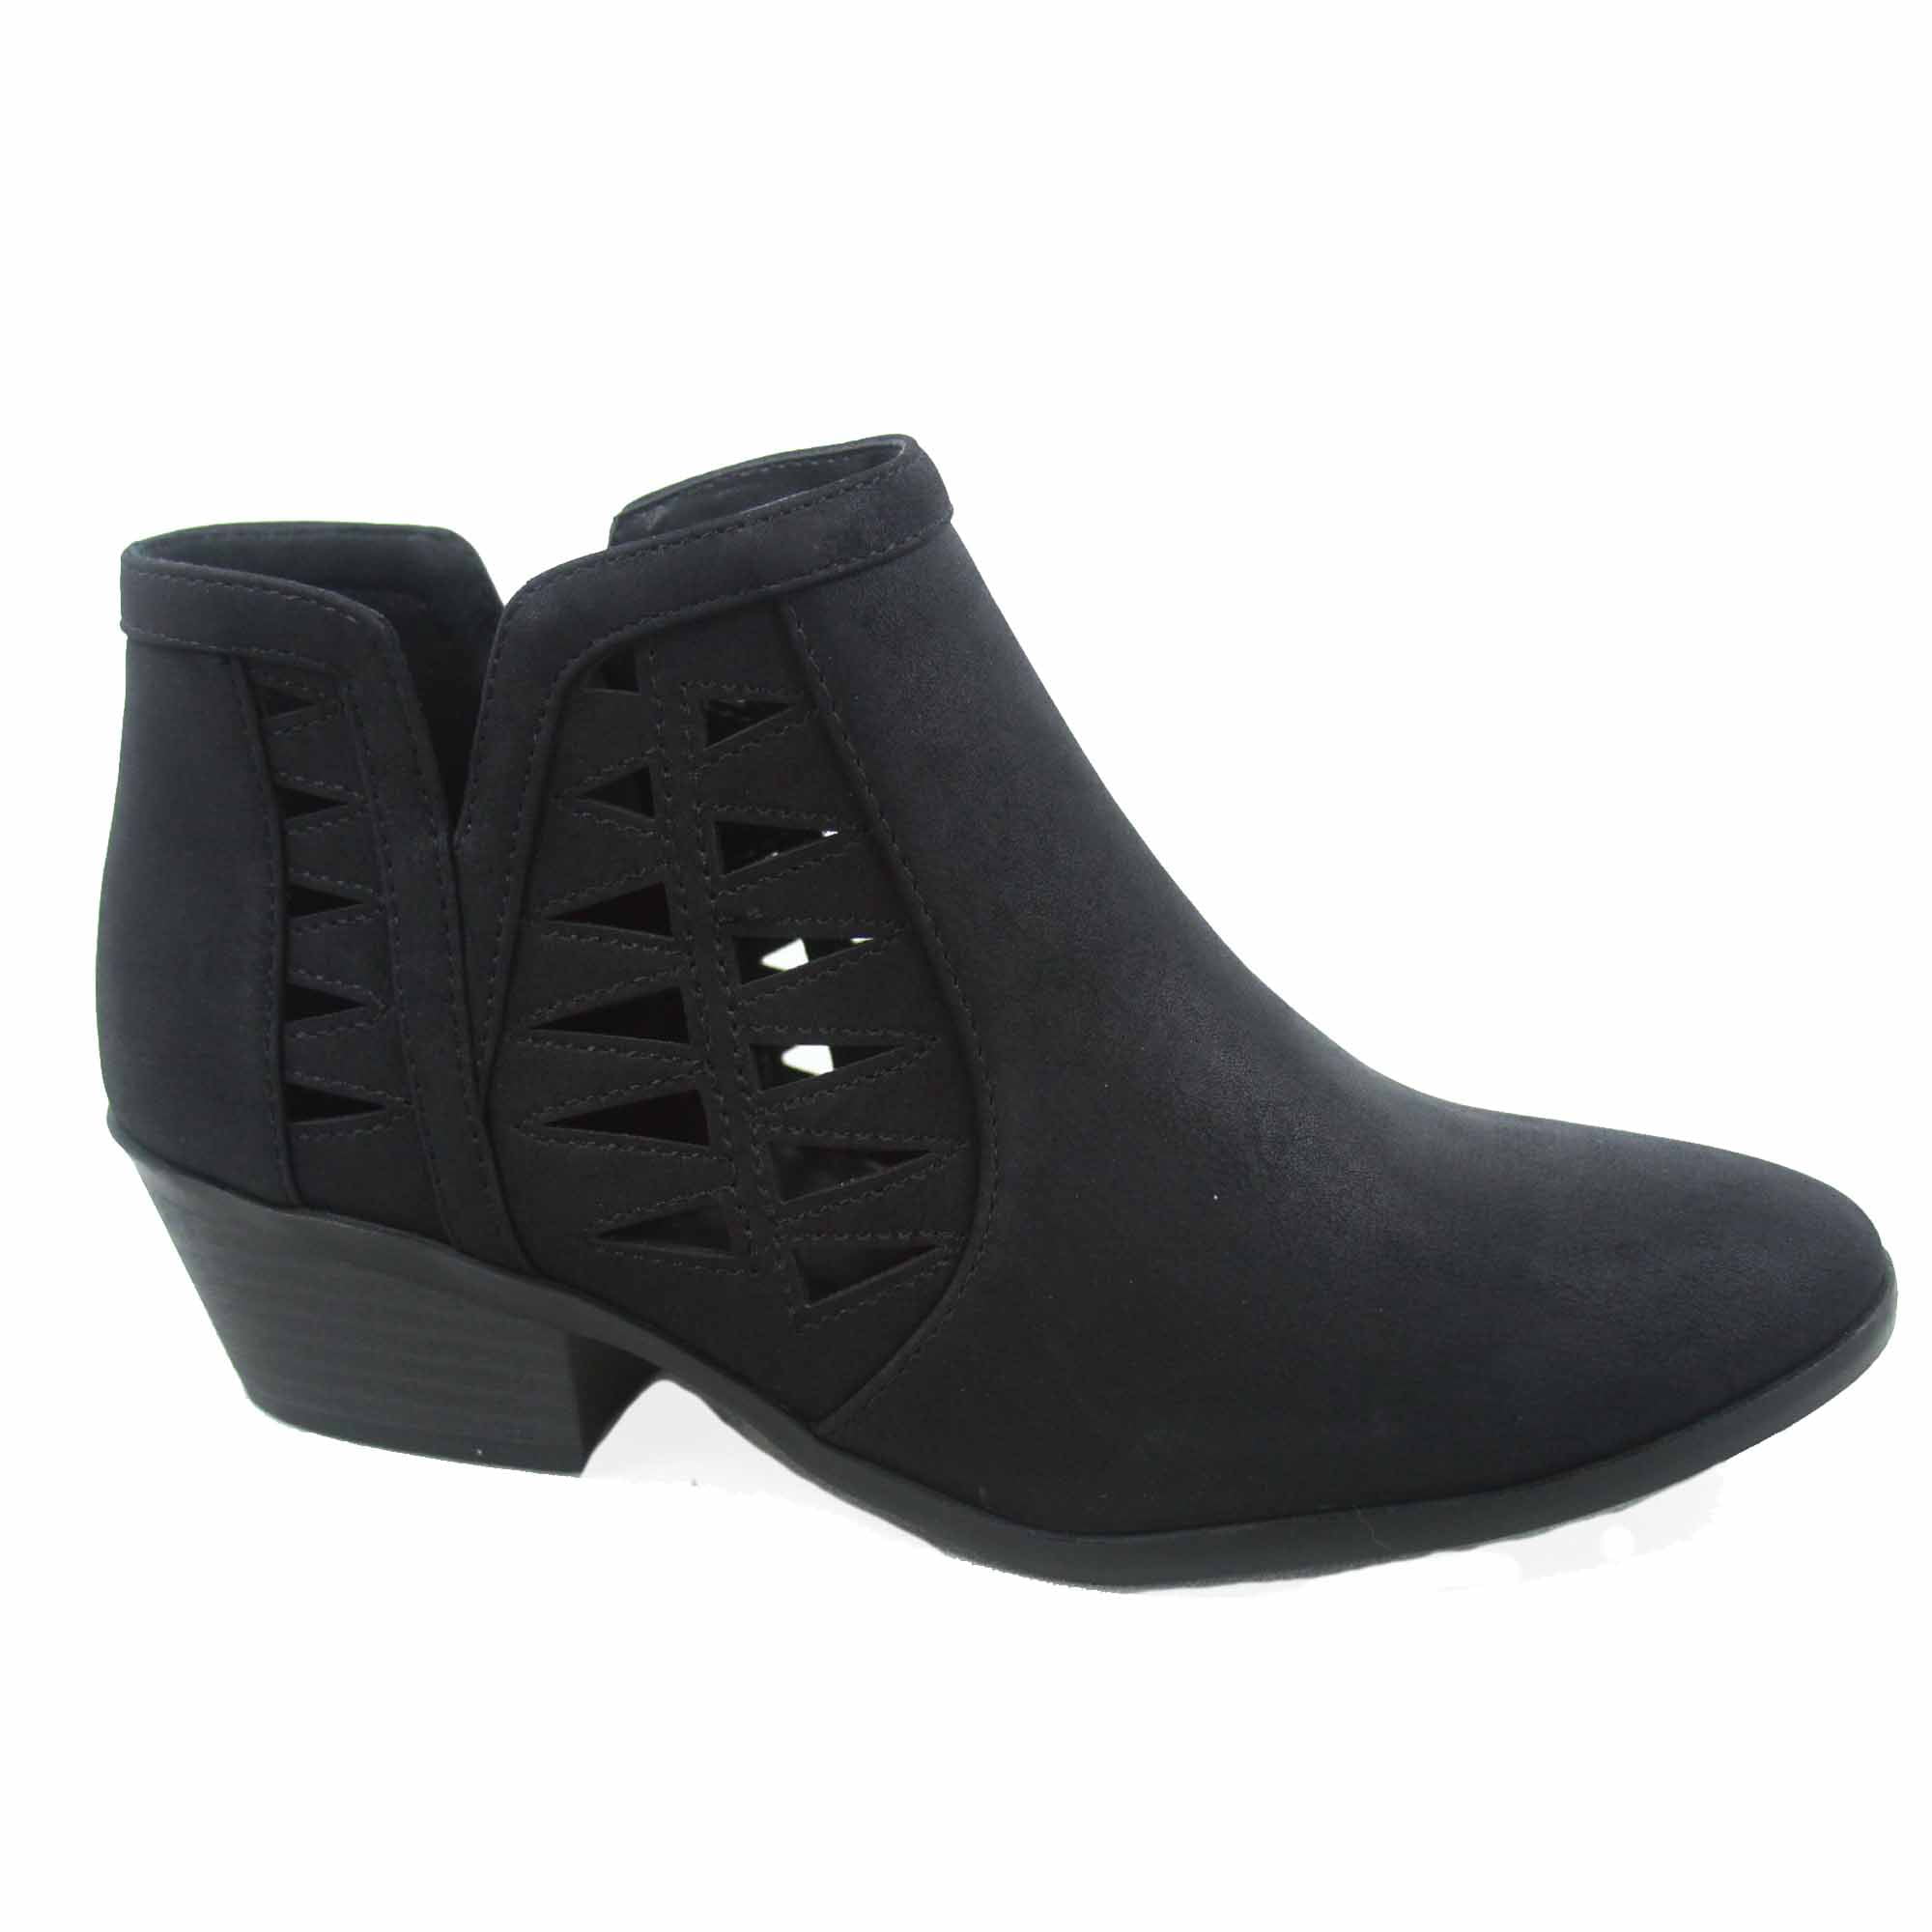 Chance-s Women's Fashion Zip Chunky Low Heel Ankle Booties Shoes ...